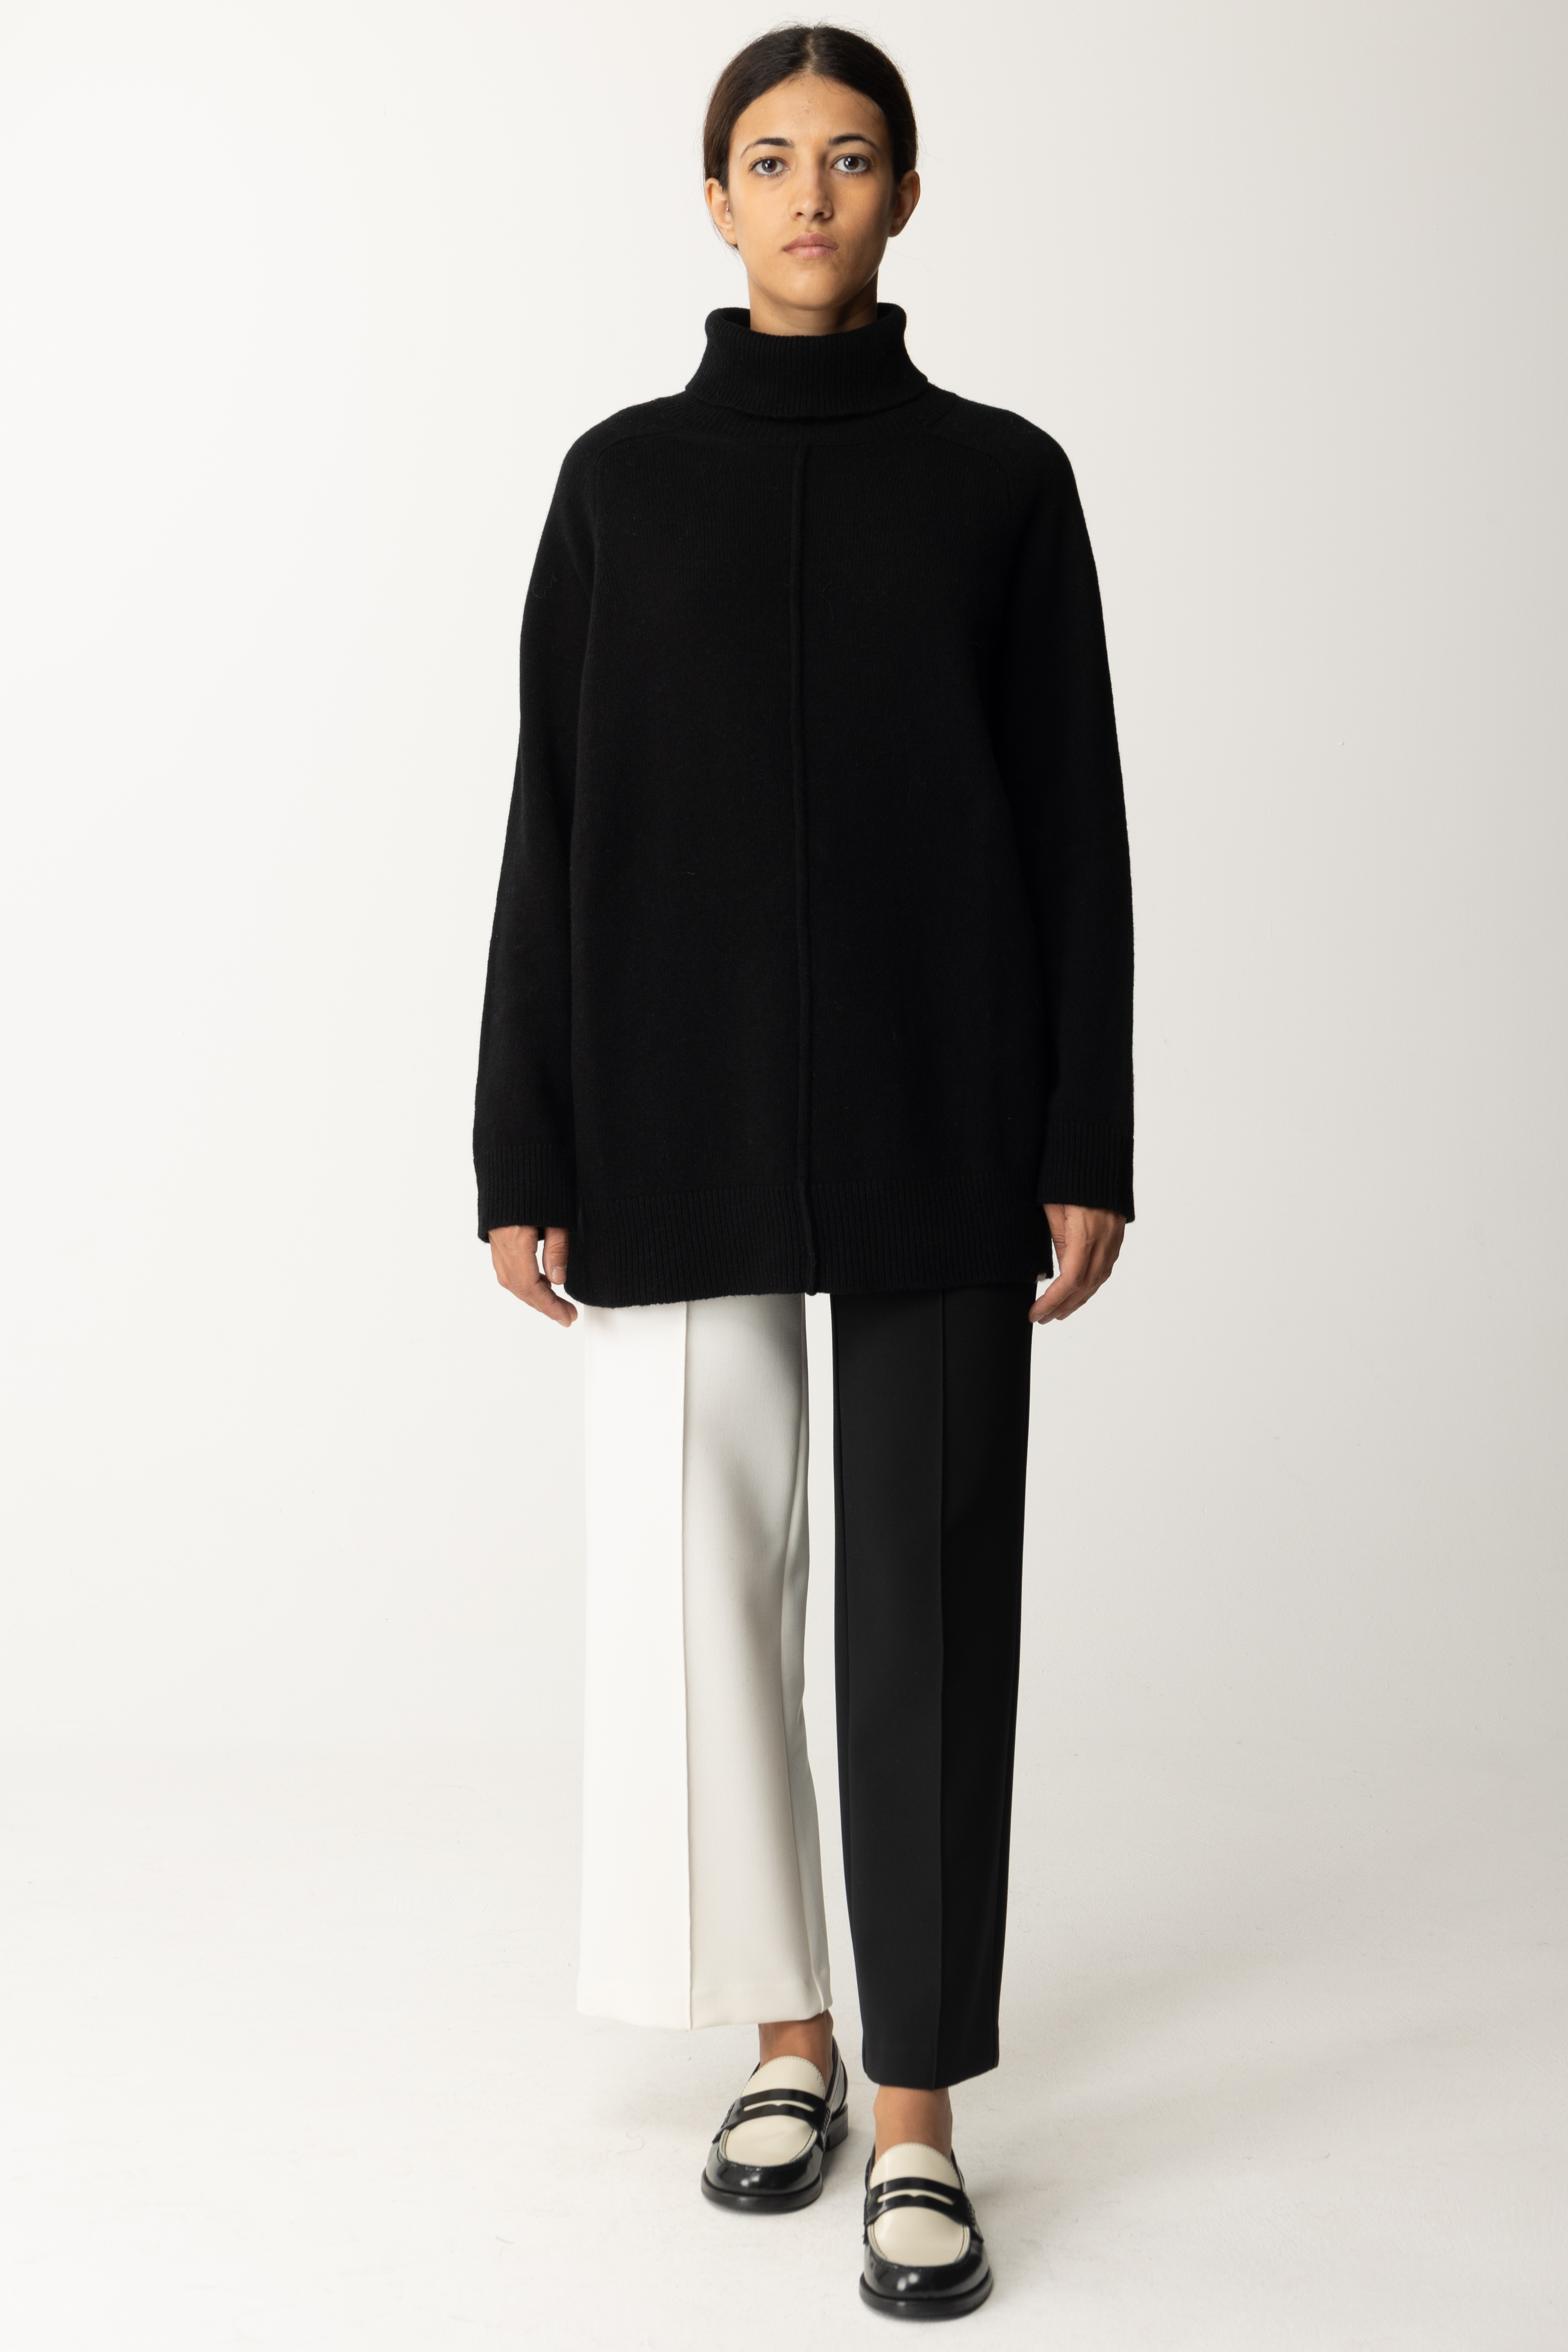 Preview: Semicouture Wool turtleneck with slit on the back Nero